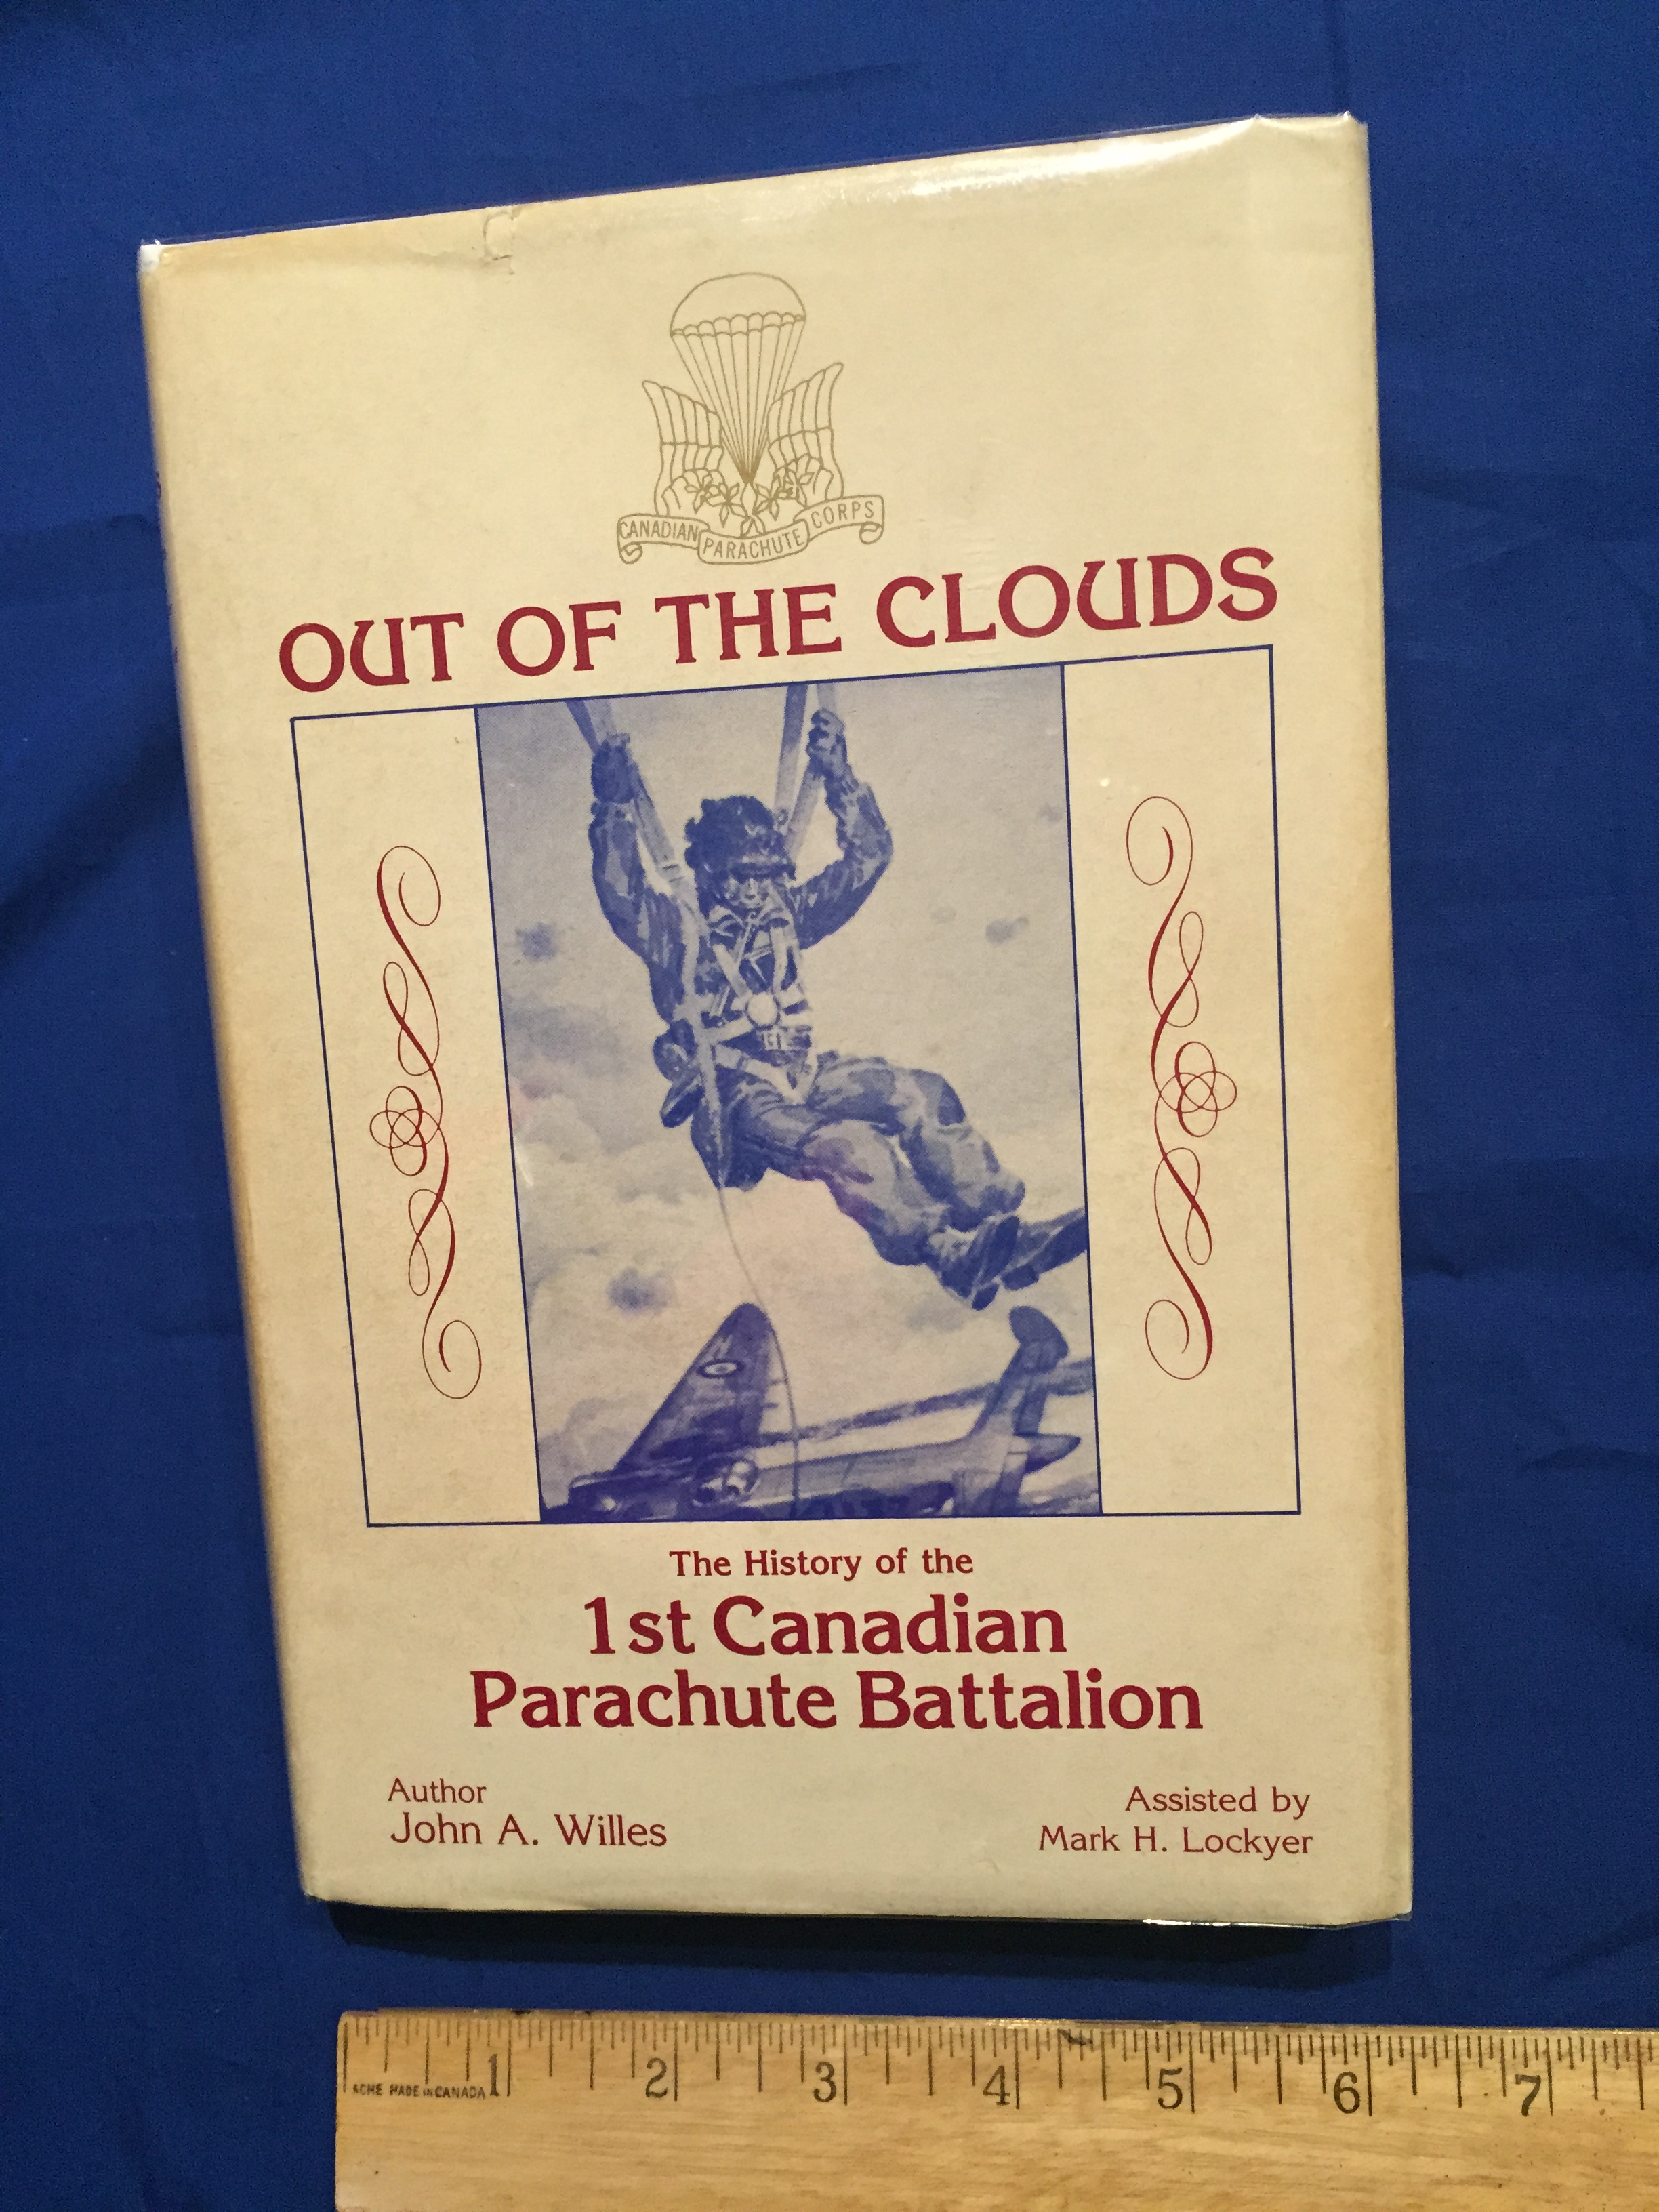 OUT OF THE CLOUDS - The history of the 1st Canadian Parachute Battalion